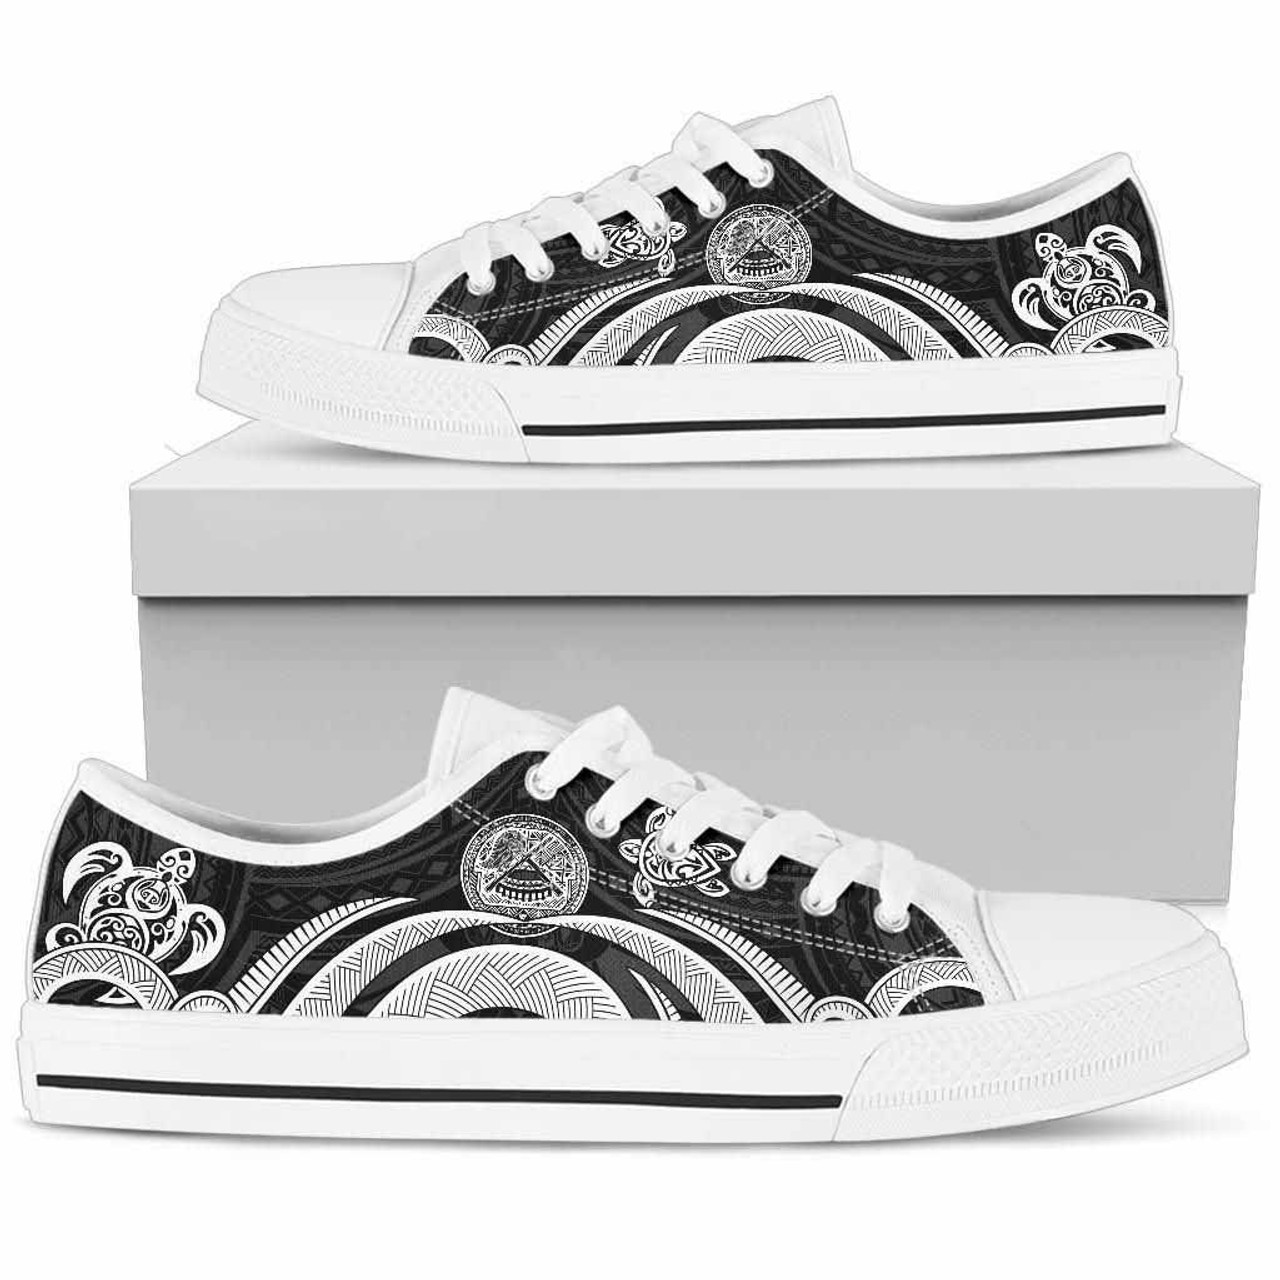 American Samoa Low Top Shoes - White Tentacle Turtle 6